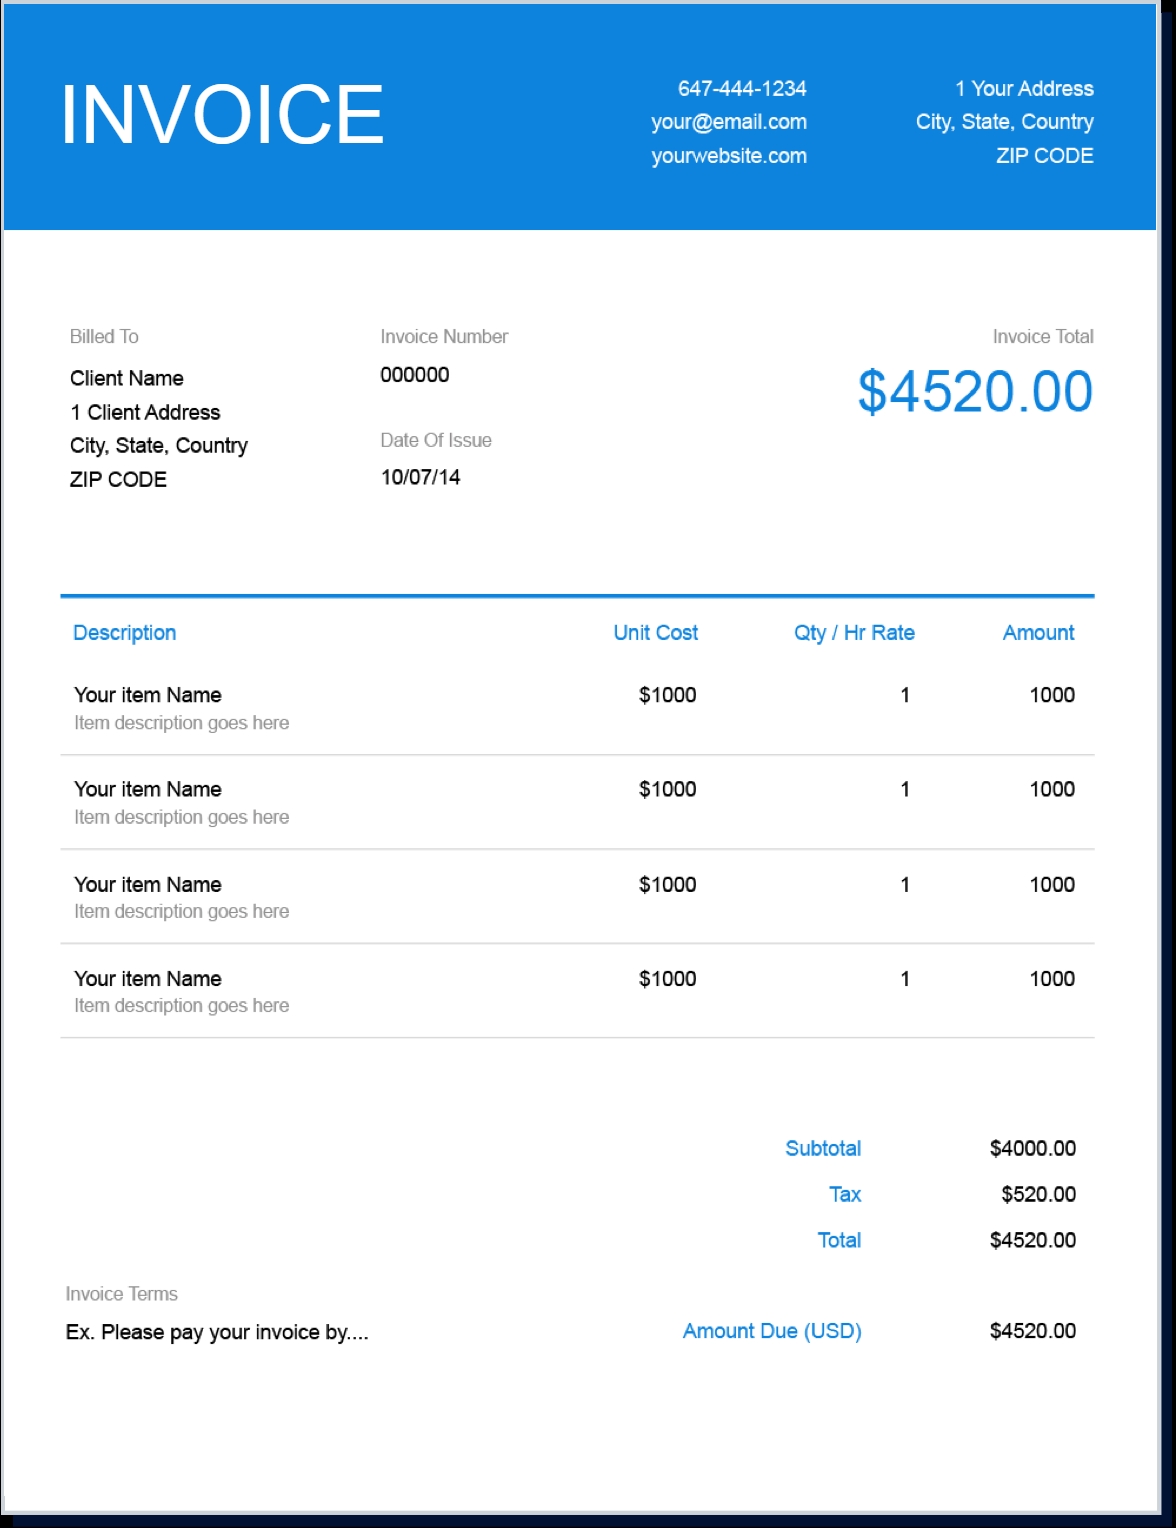 invoice template create and send free invoices instantly free customizable invoice templates printable